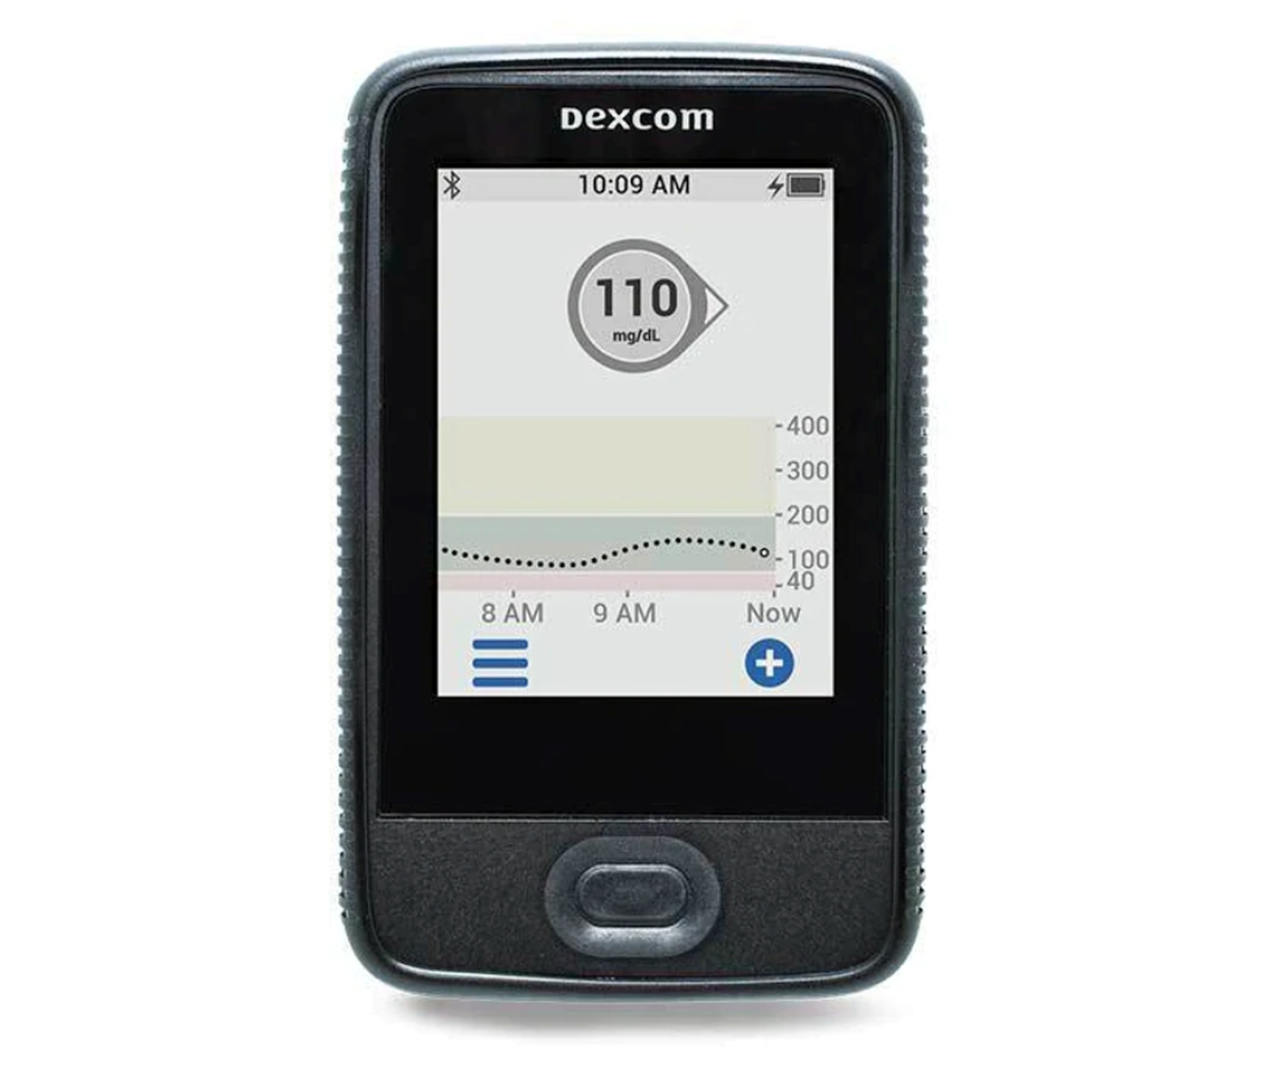 How To Find Lost Dexcom Receiver